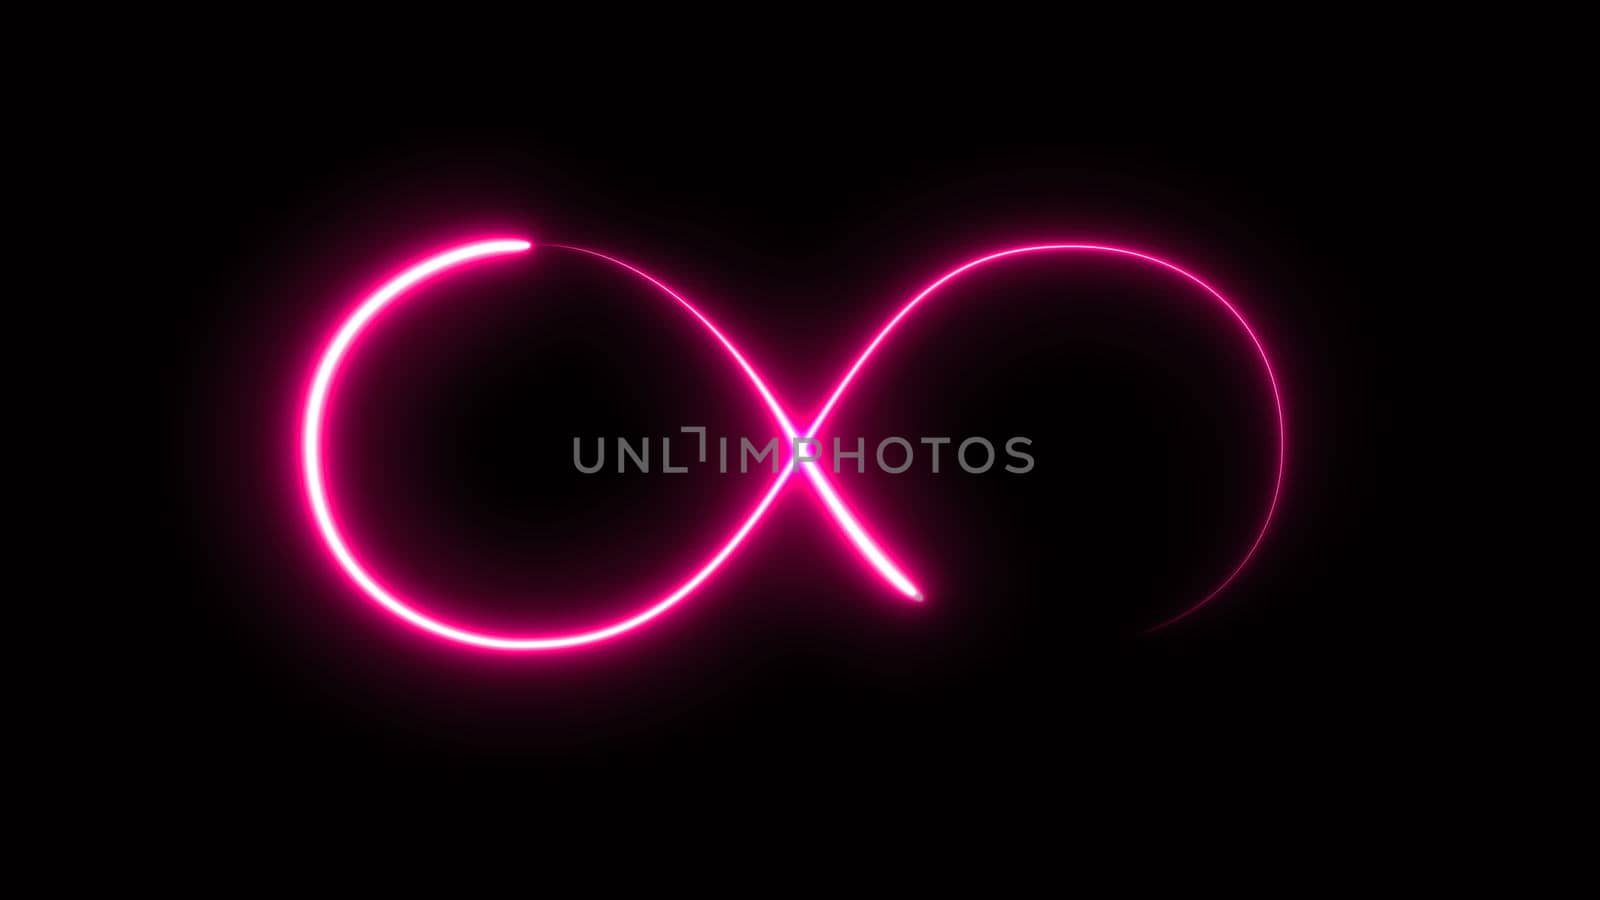 Abstract background with infinity sign. Digital illustration. 3d rendering